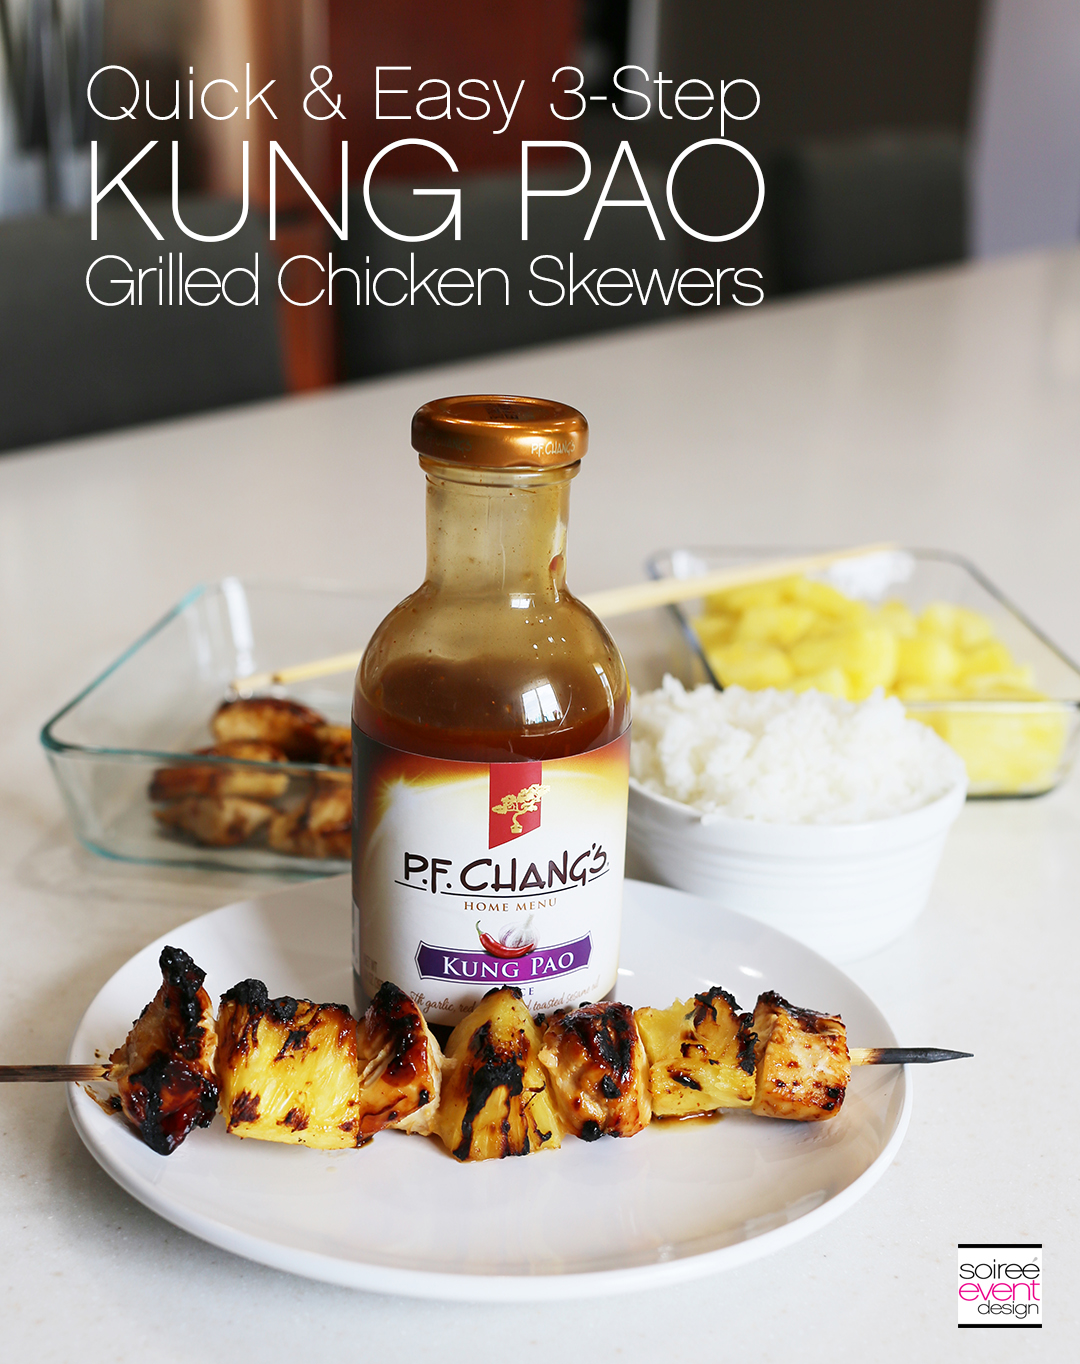 3-Step Kung Pao Grilled Chicken Skewers